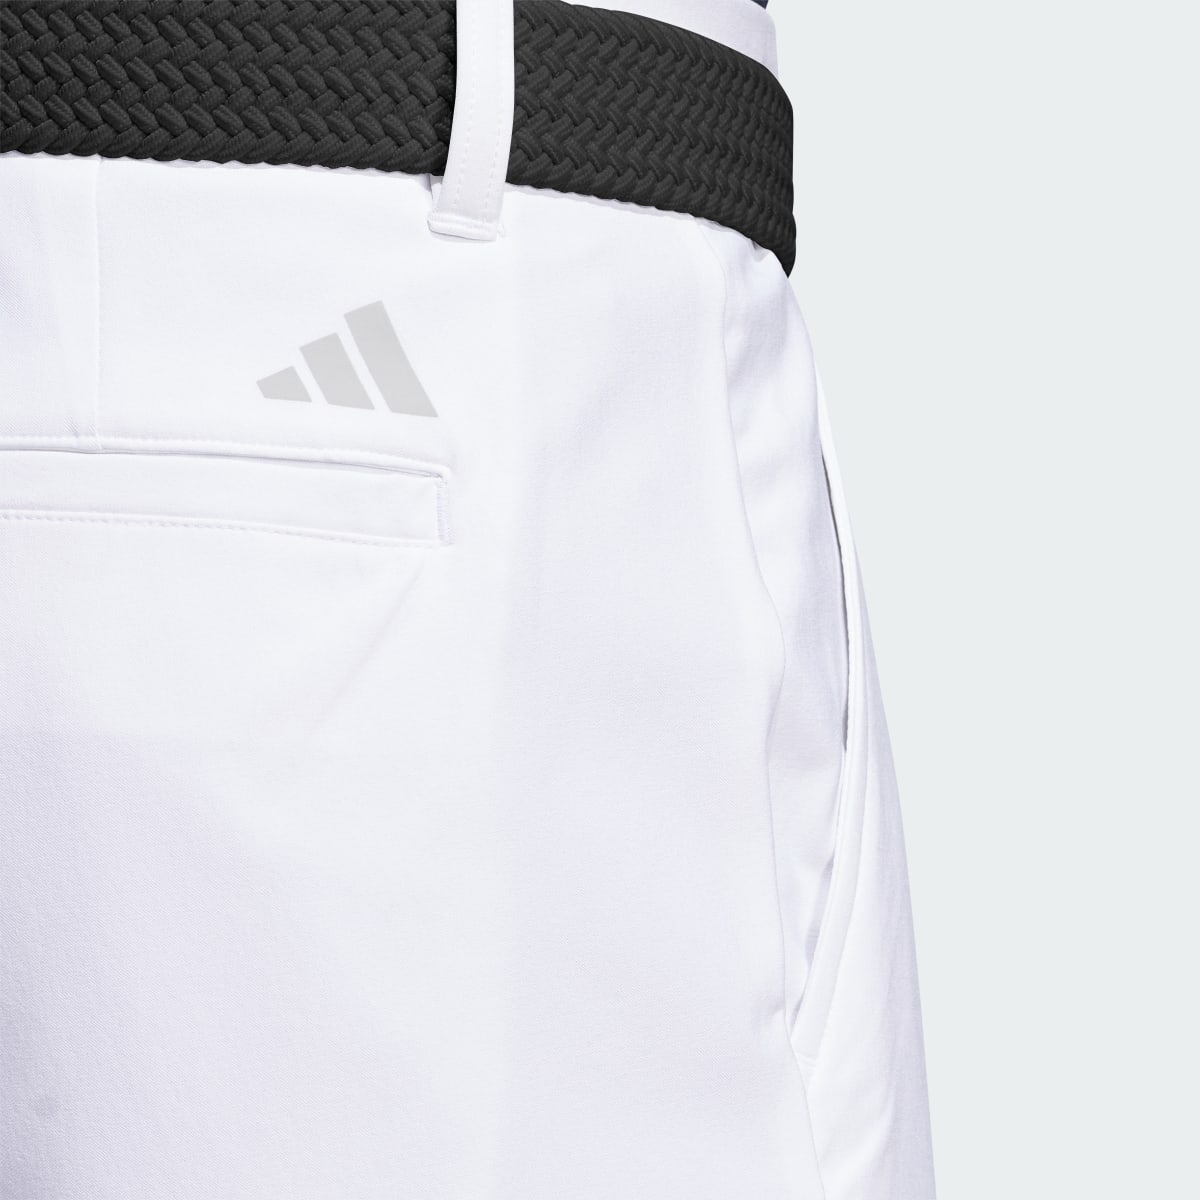 Adidas Ultimate365 Golf Trousers. 6